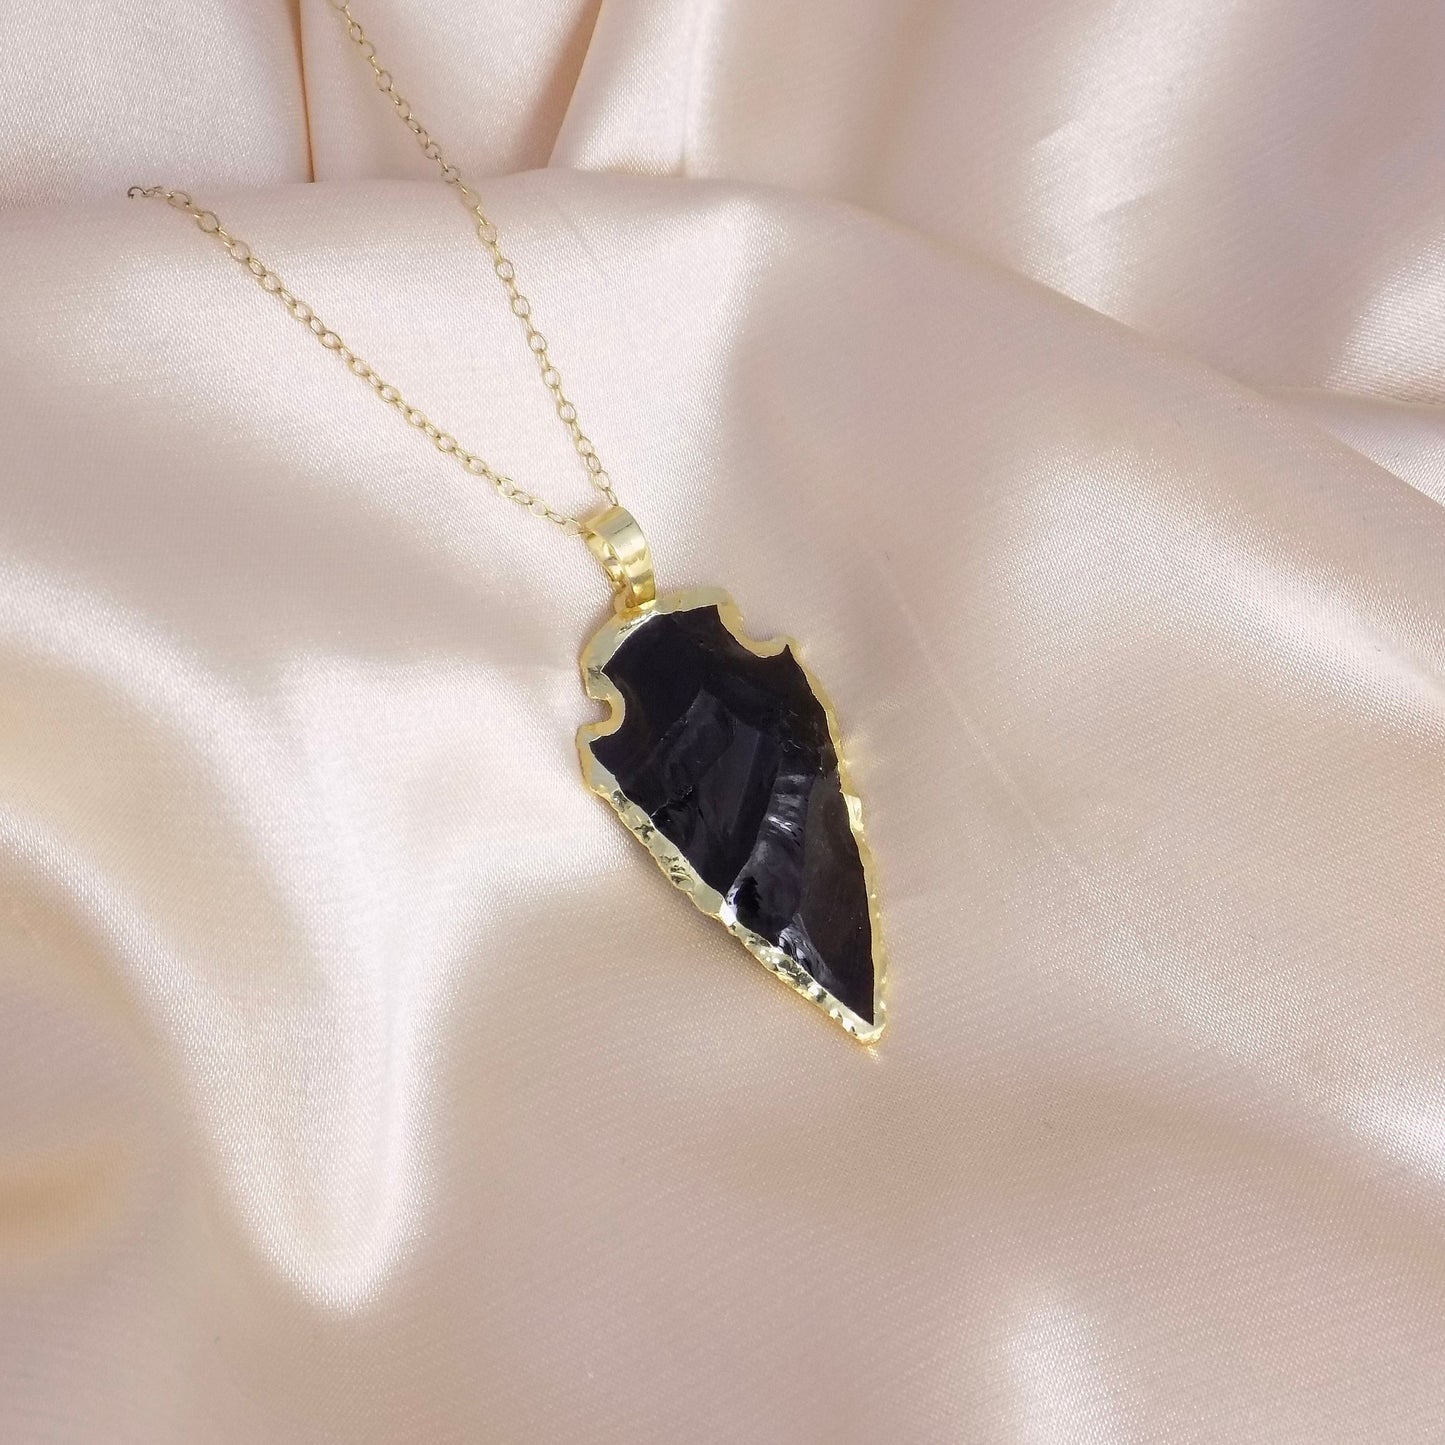 Gift For Her, Black Obsidian Necklace, Arrowhead Pendant Necklace Gold, Raw Stone Crystal Necklaces For Women, Gifts For Mom, M7-47